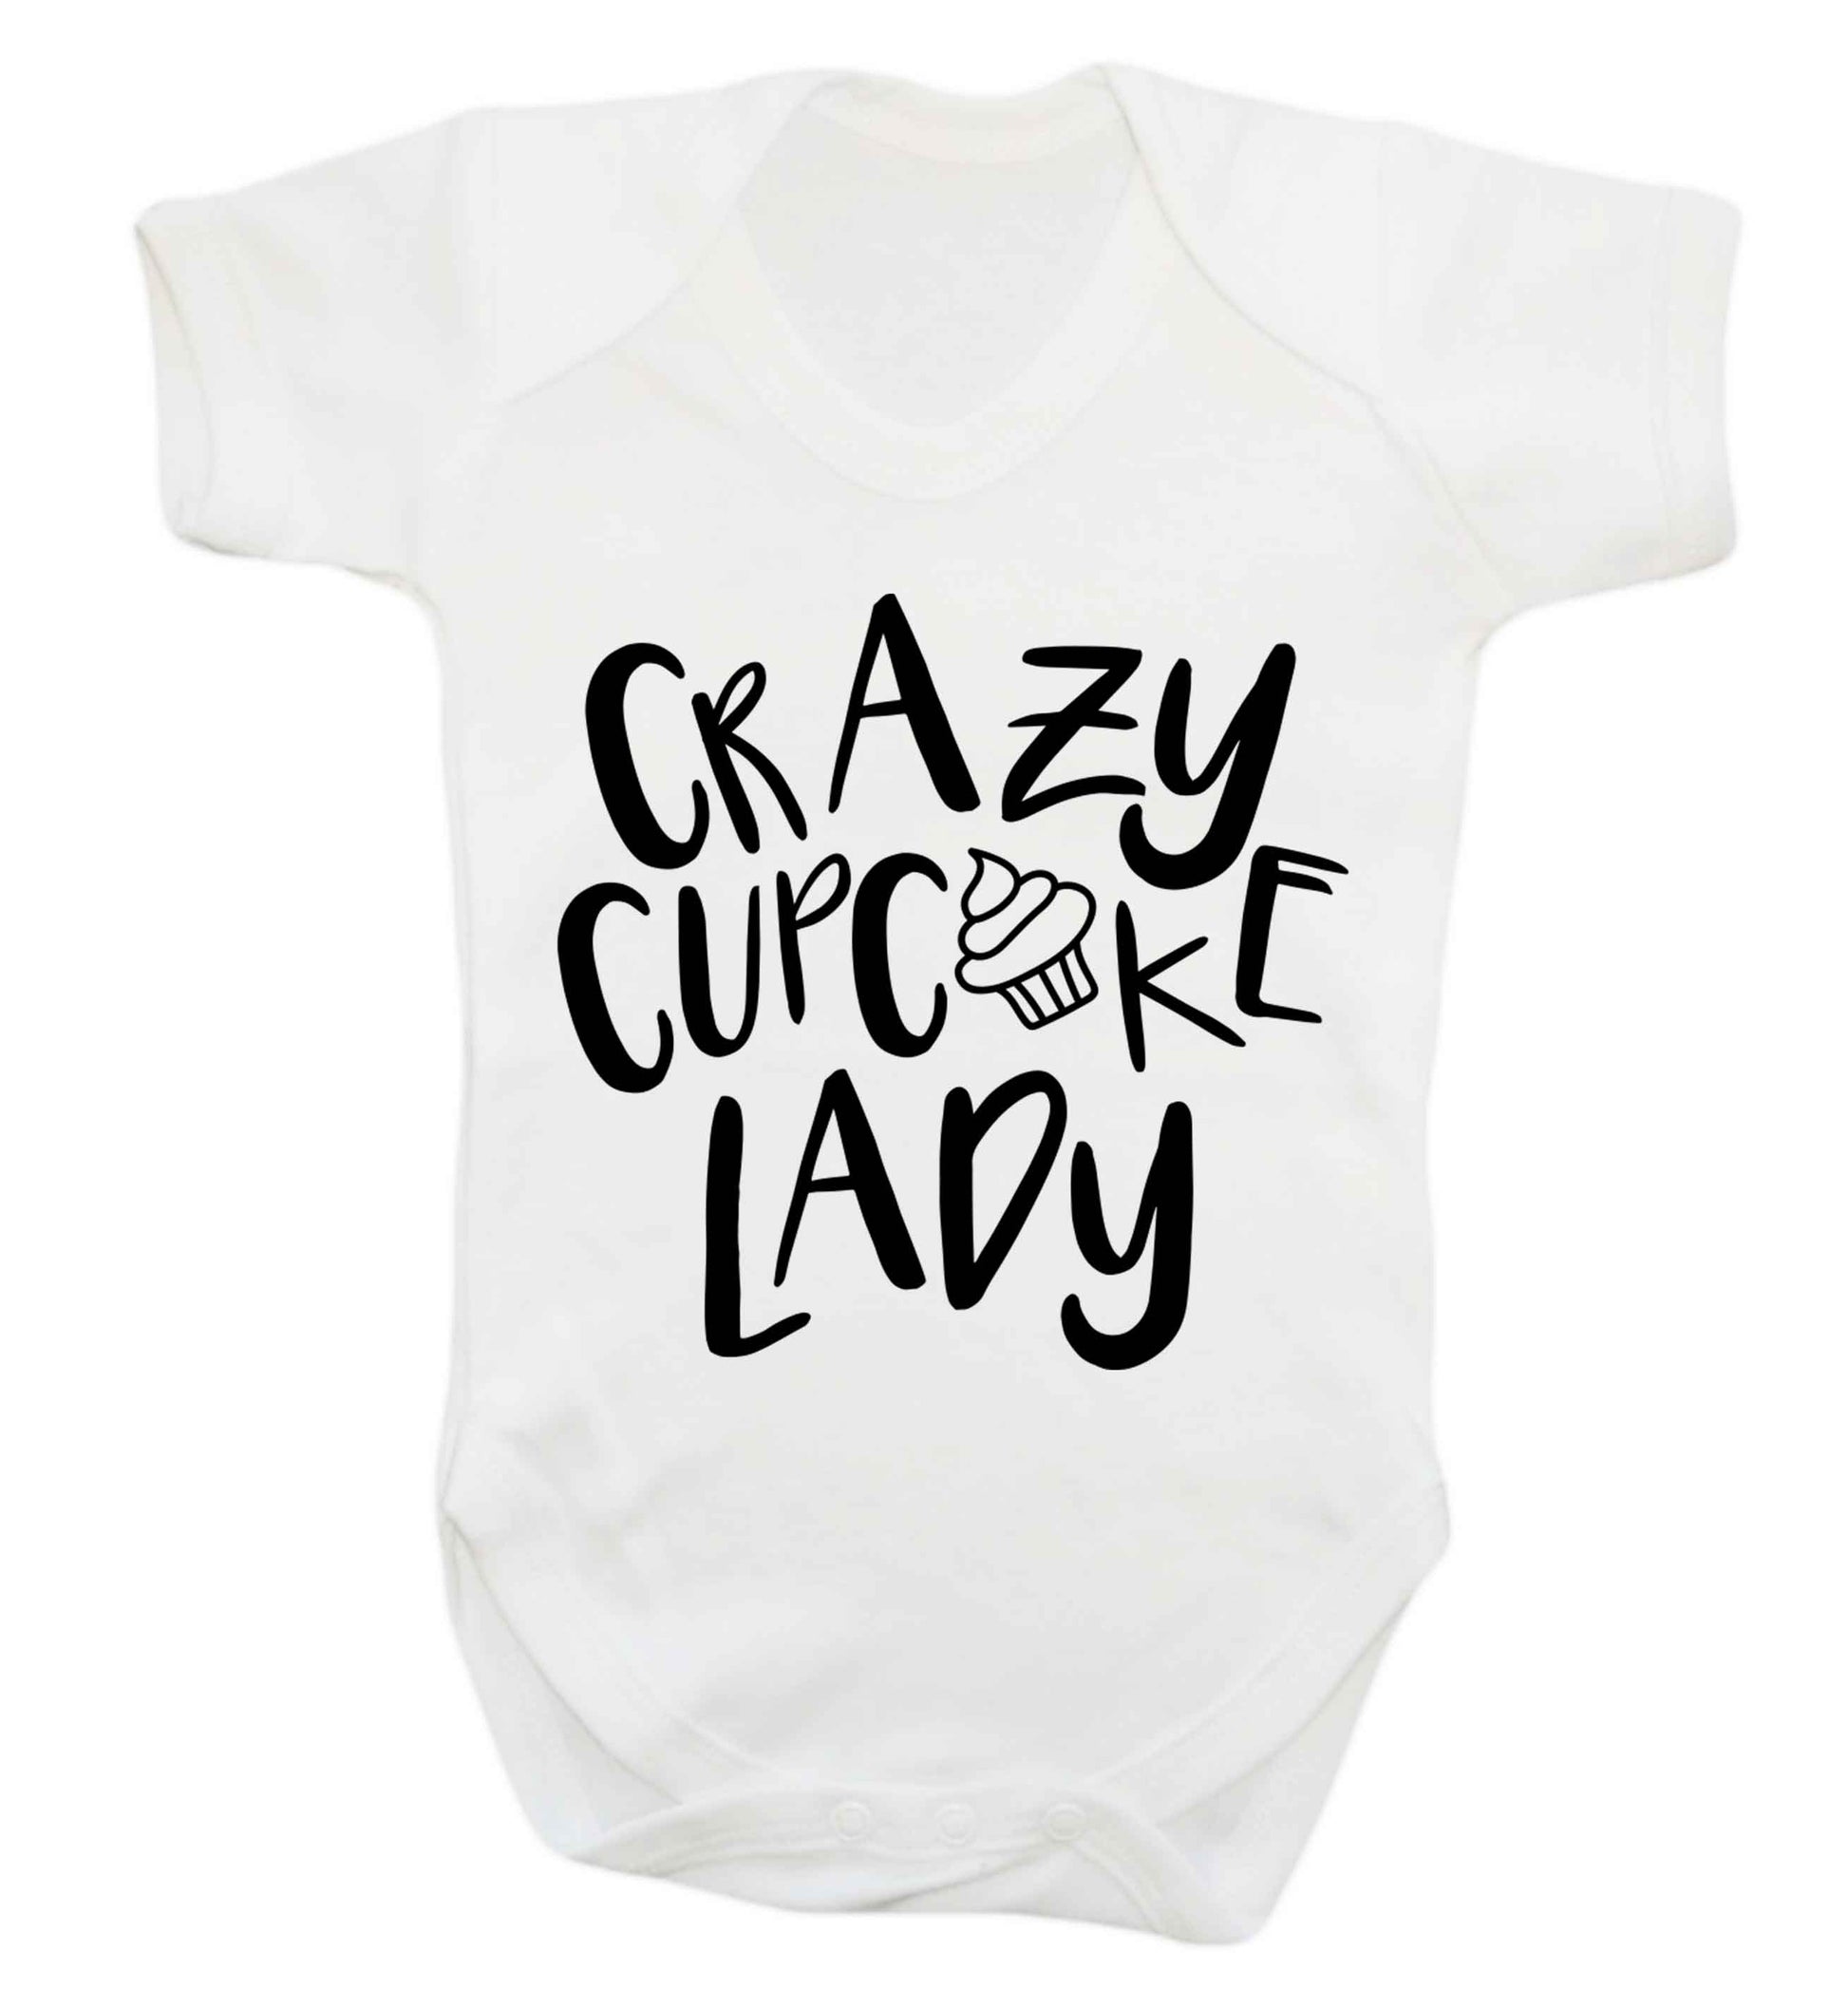 Crazy cupcake lady Baby Vest white 18-24 months